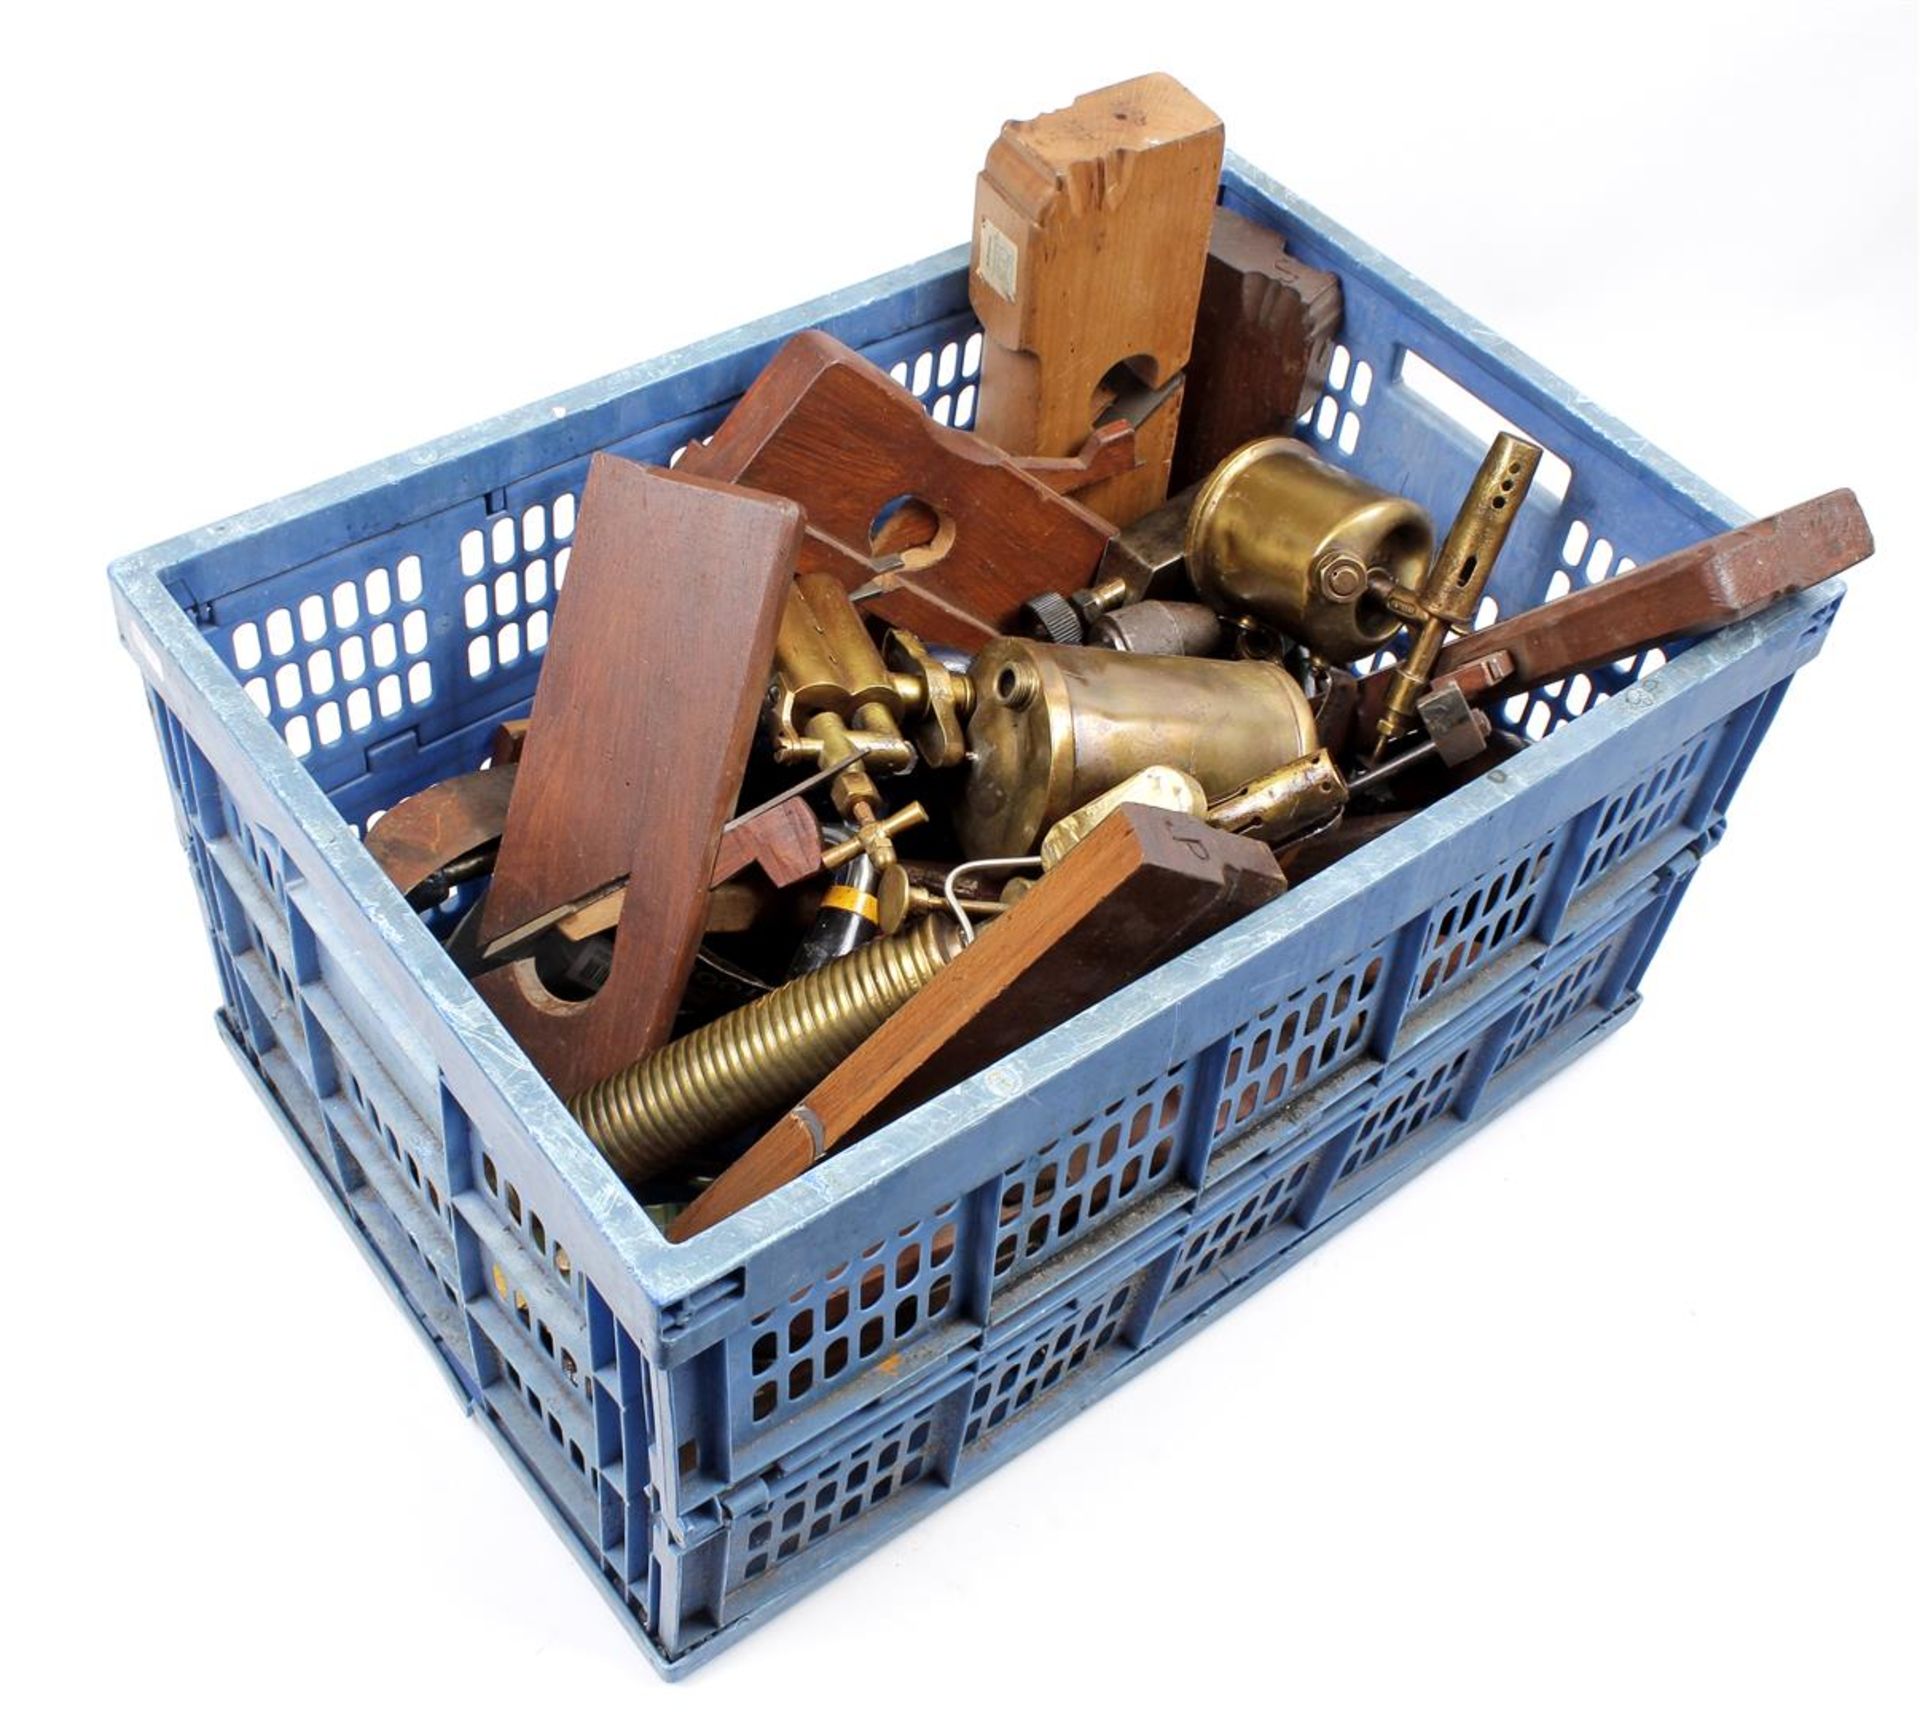 Crate with various hand tools